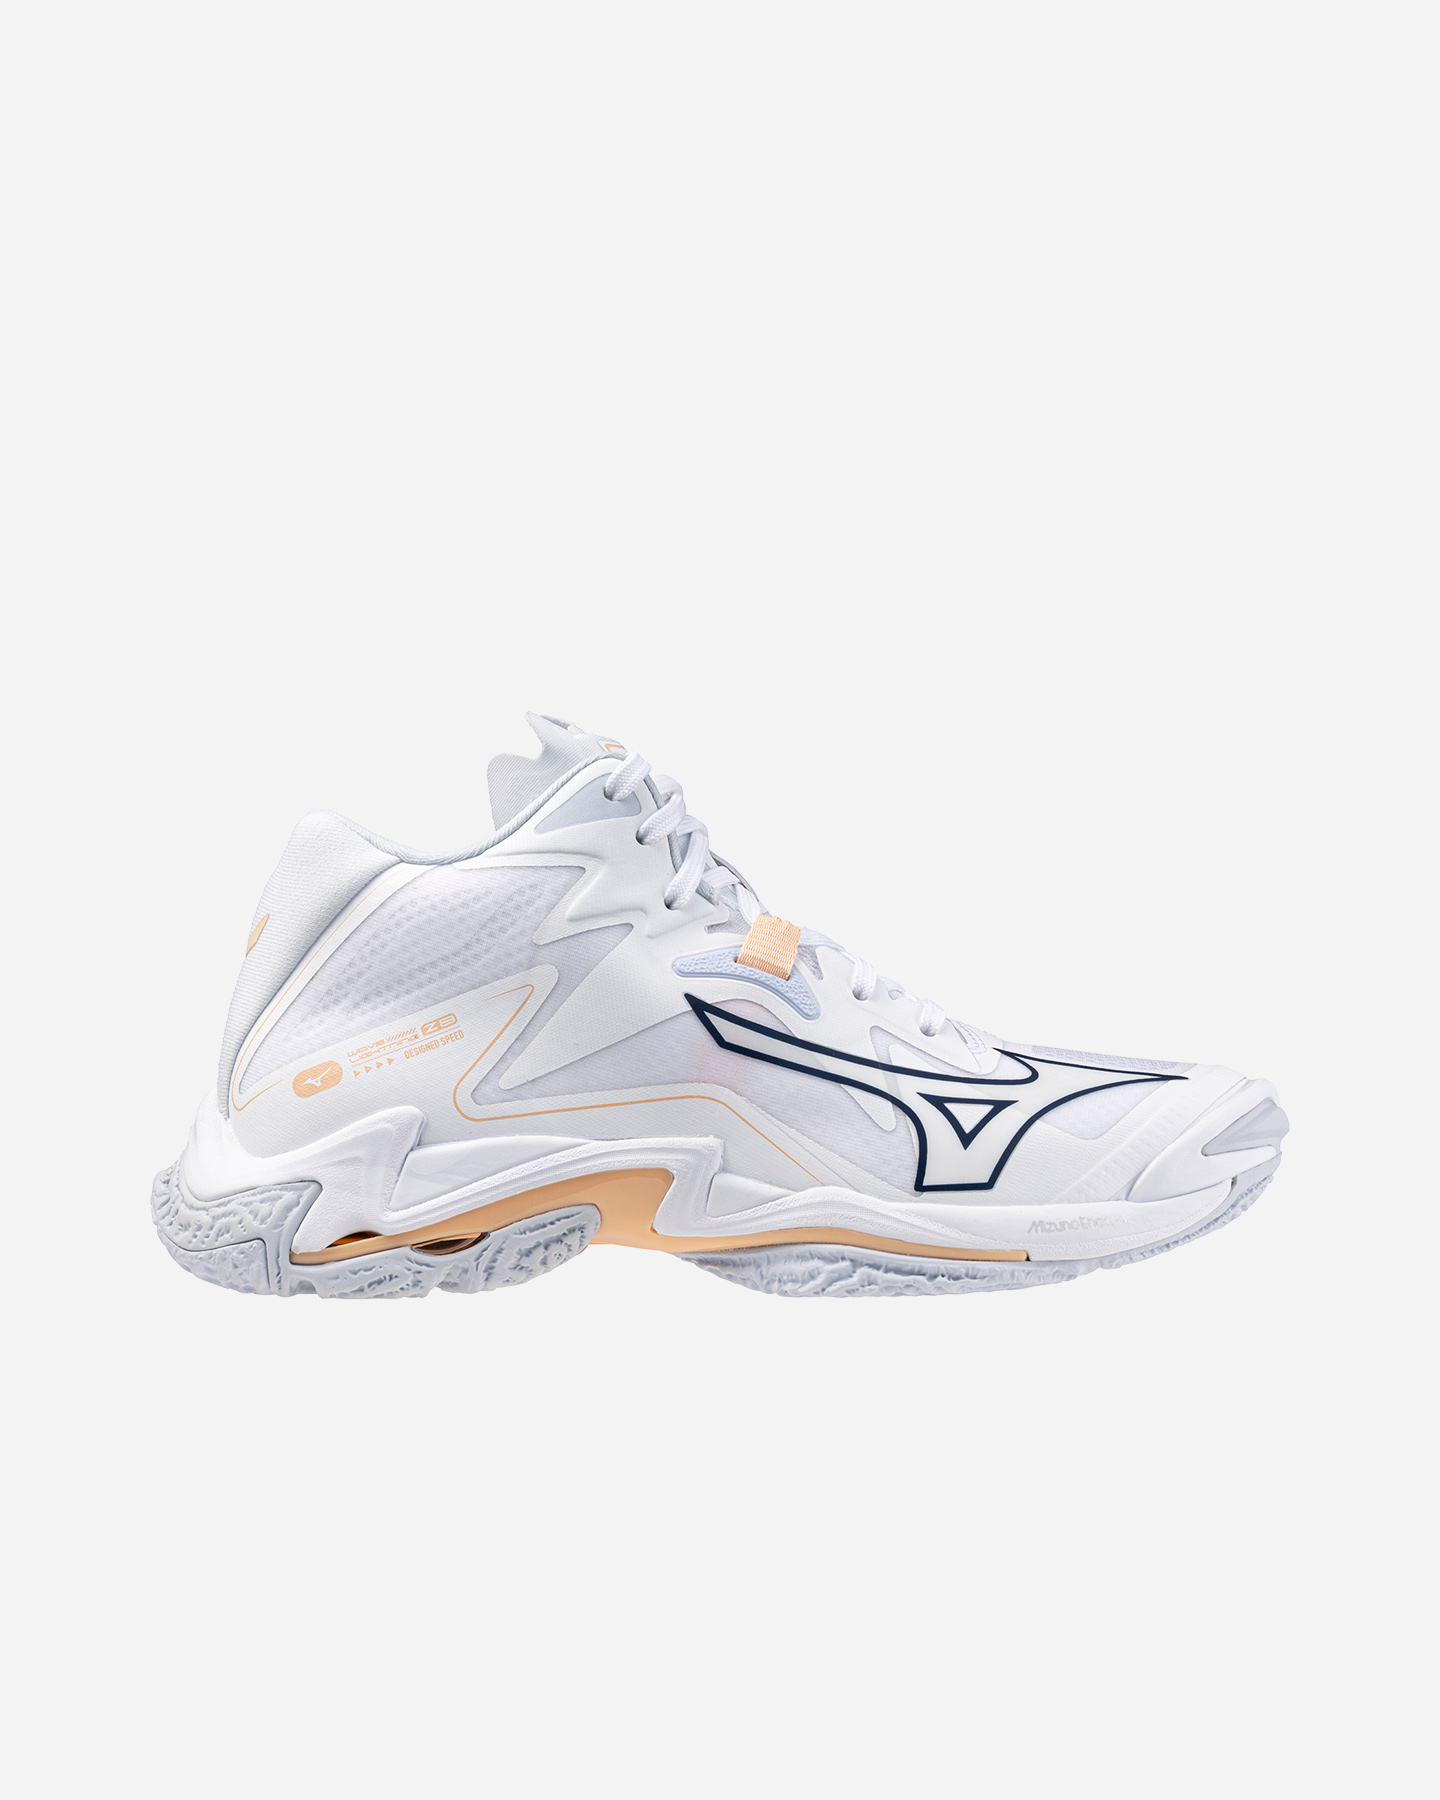 Image of Mizuno Wave Lightning Z Mid Wos W - Scarpe Volley - Donna